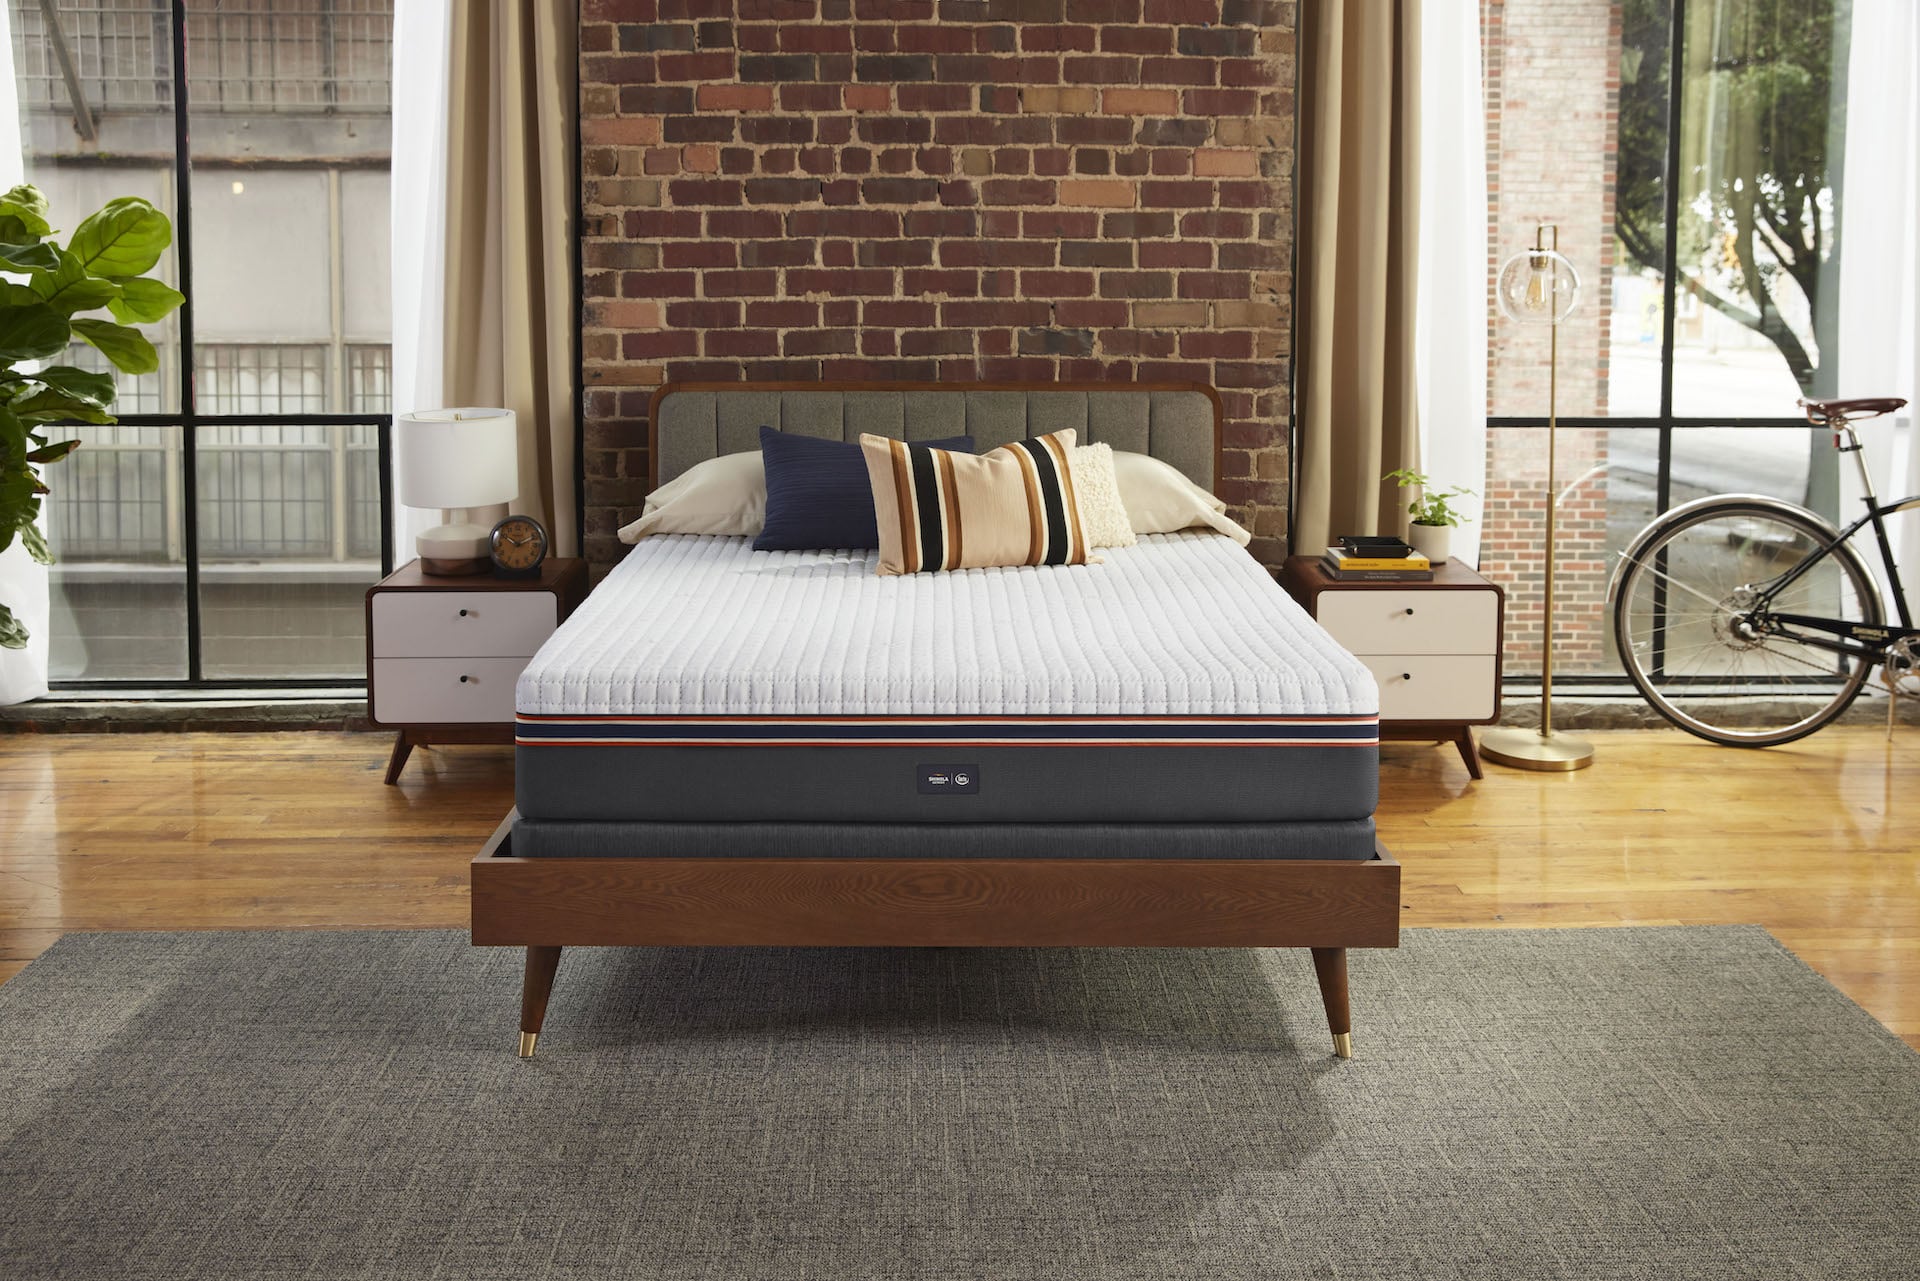 Serta Simmons Bedding Announces Updates to Key Lines in its Serta and  Beautyrest Portfolio